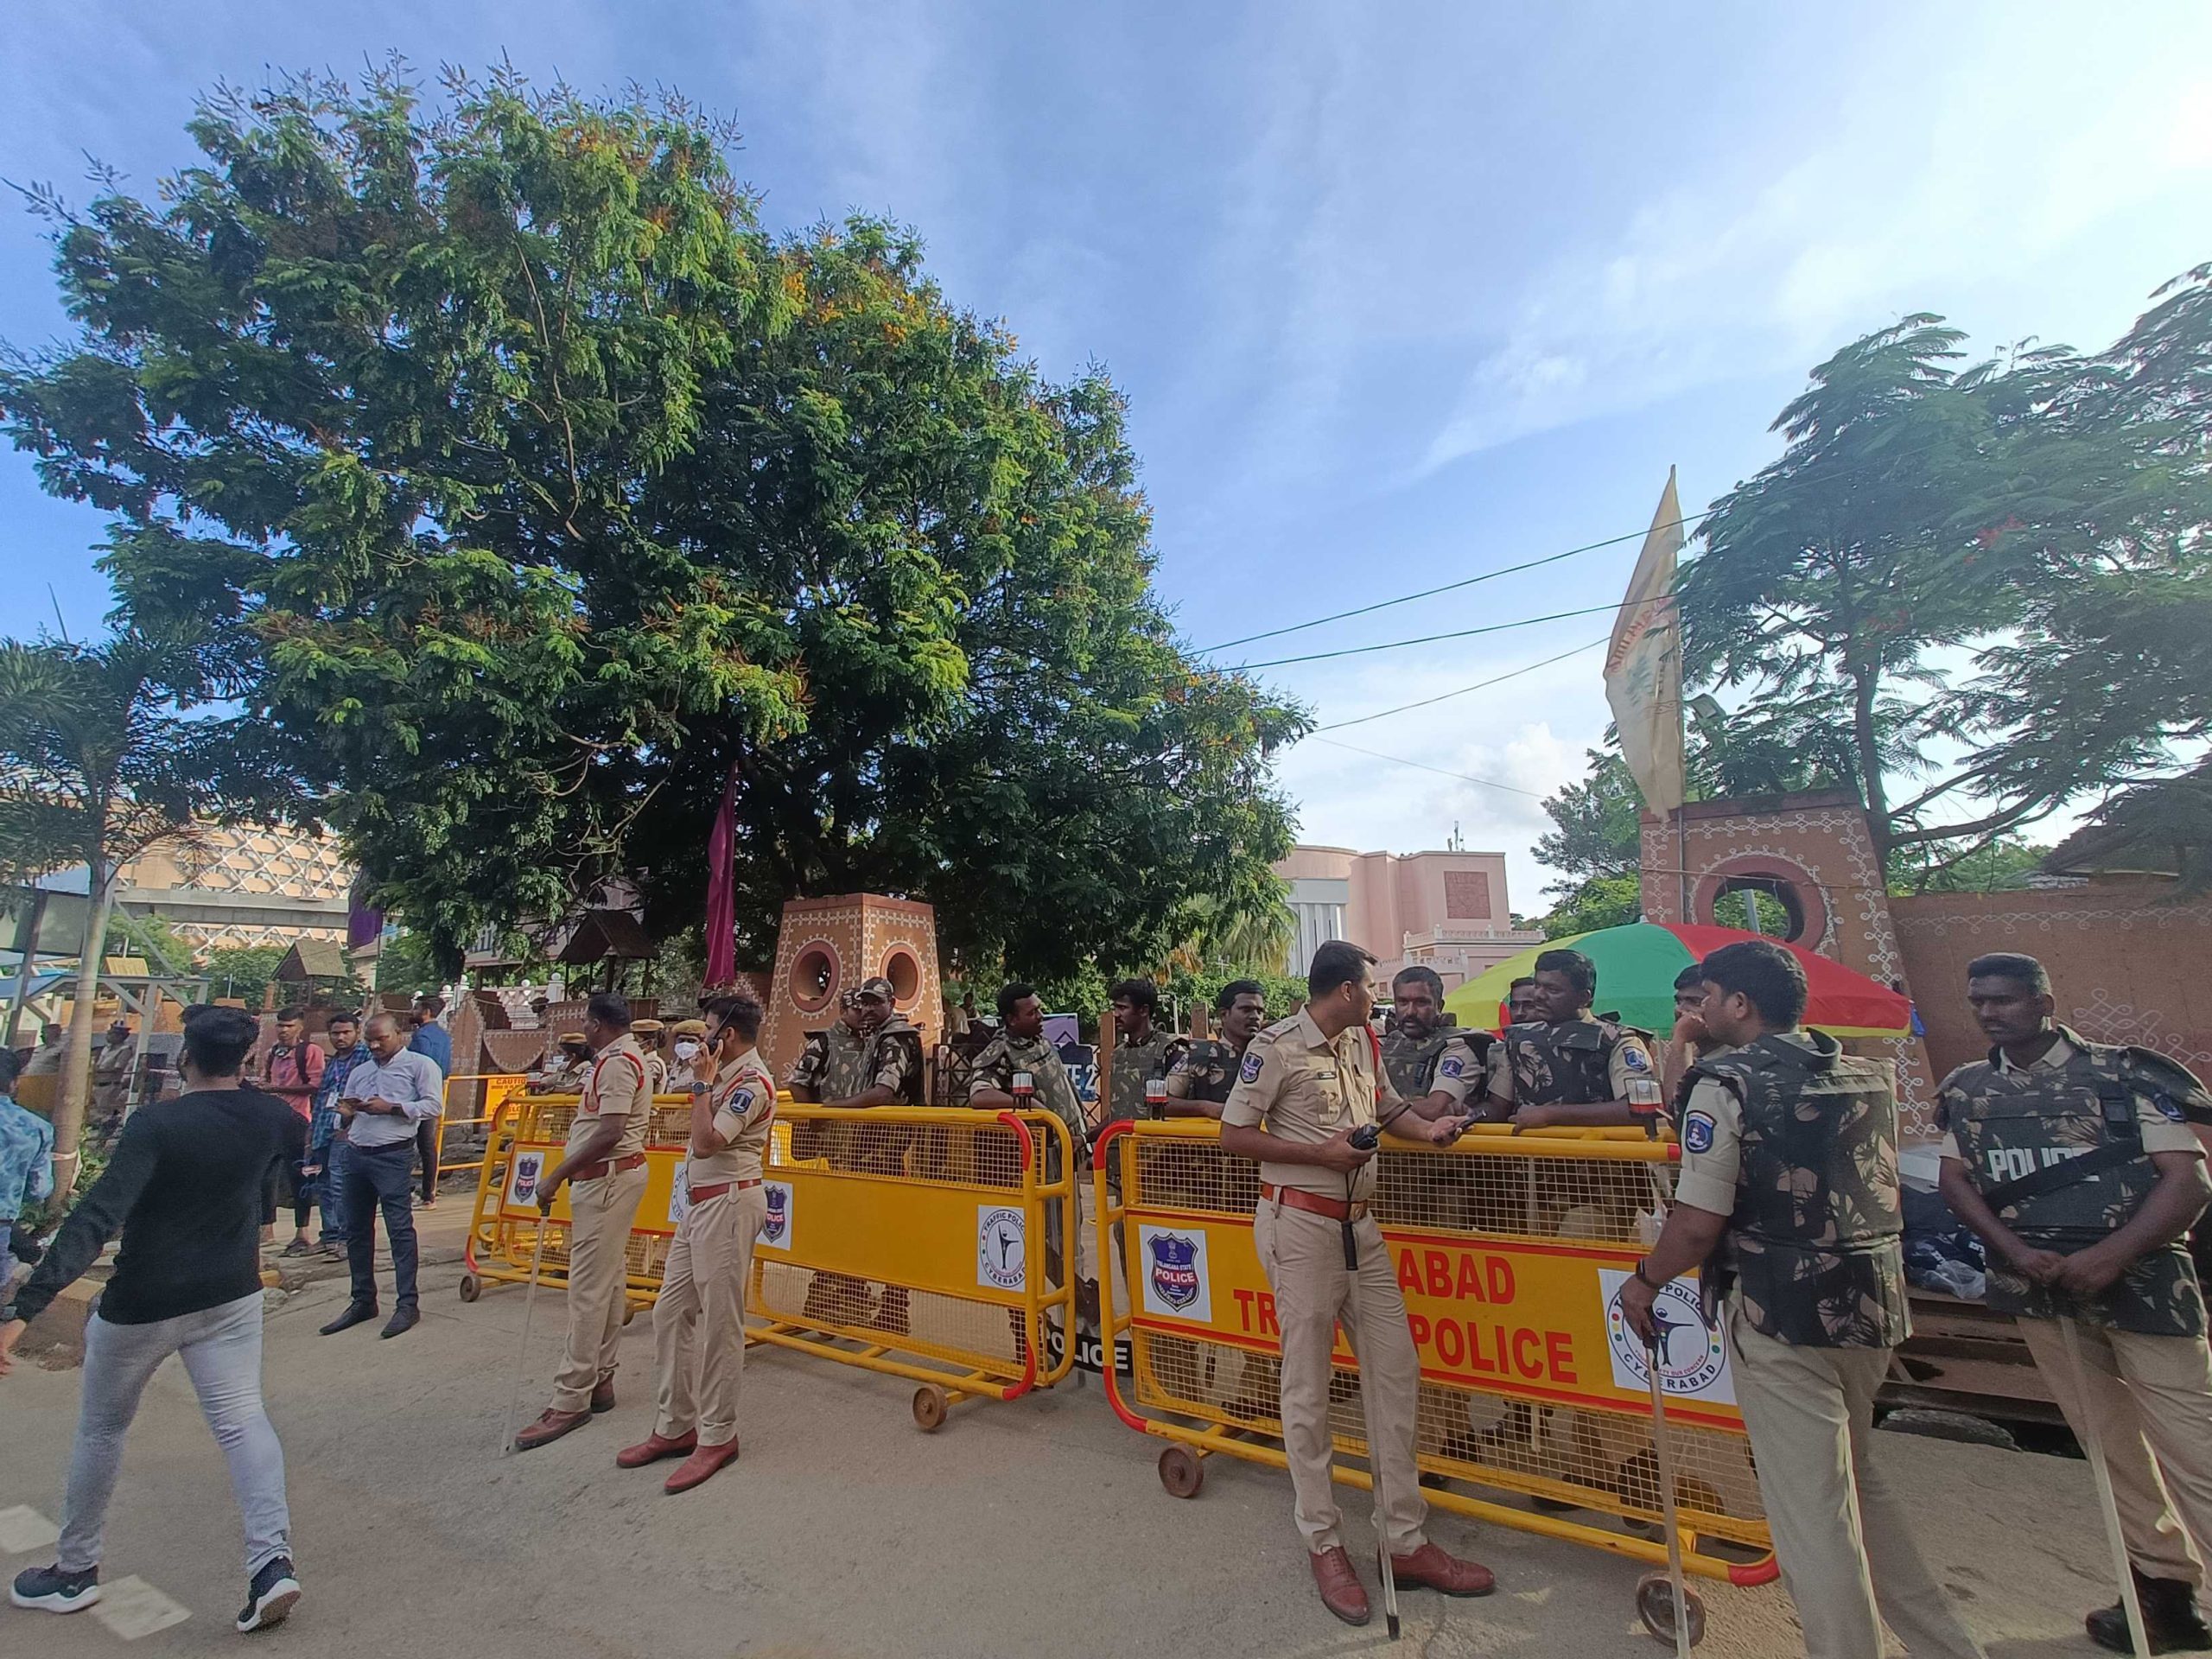 The Cyberabad Special Operations Teams, Telangana State Special Police, Madhapur zone police along with Armed Reserve platoons have been deployed at the venue for security. (Sumit Jha)